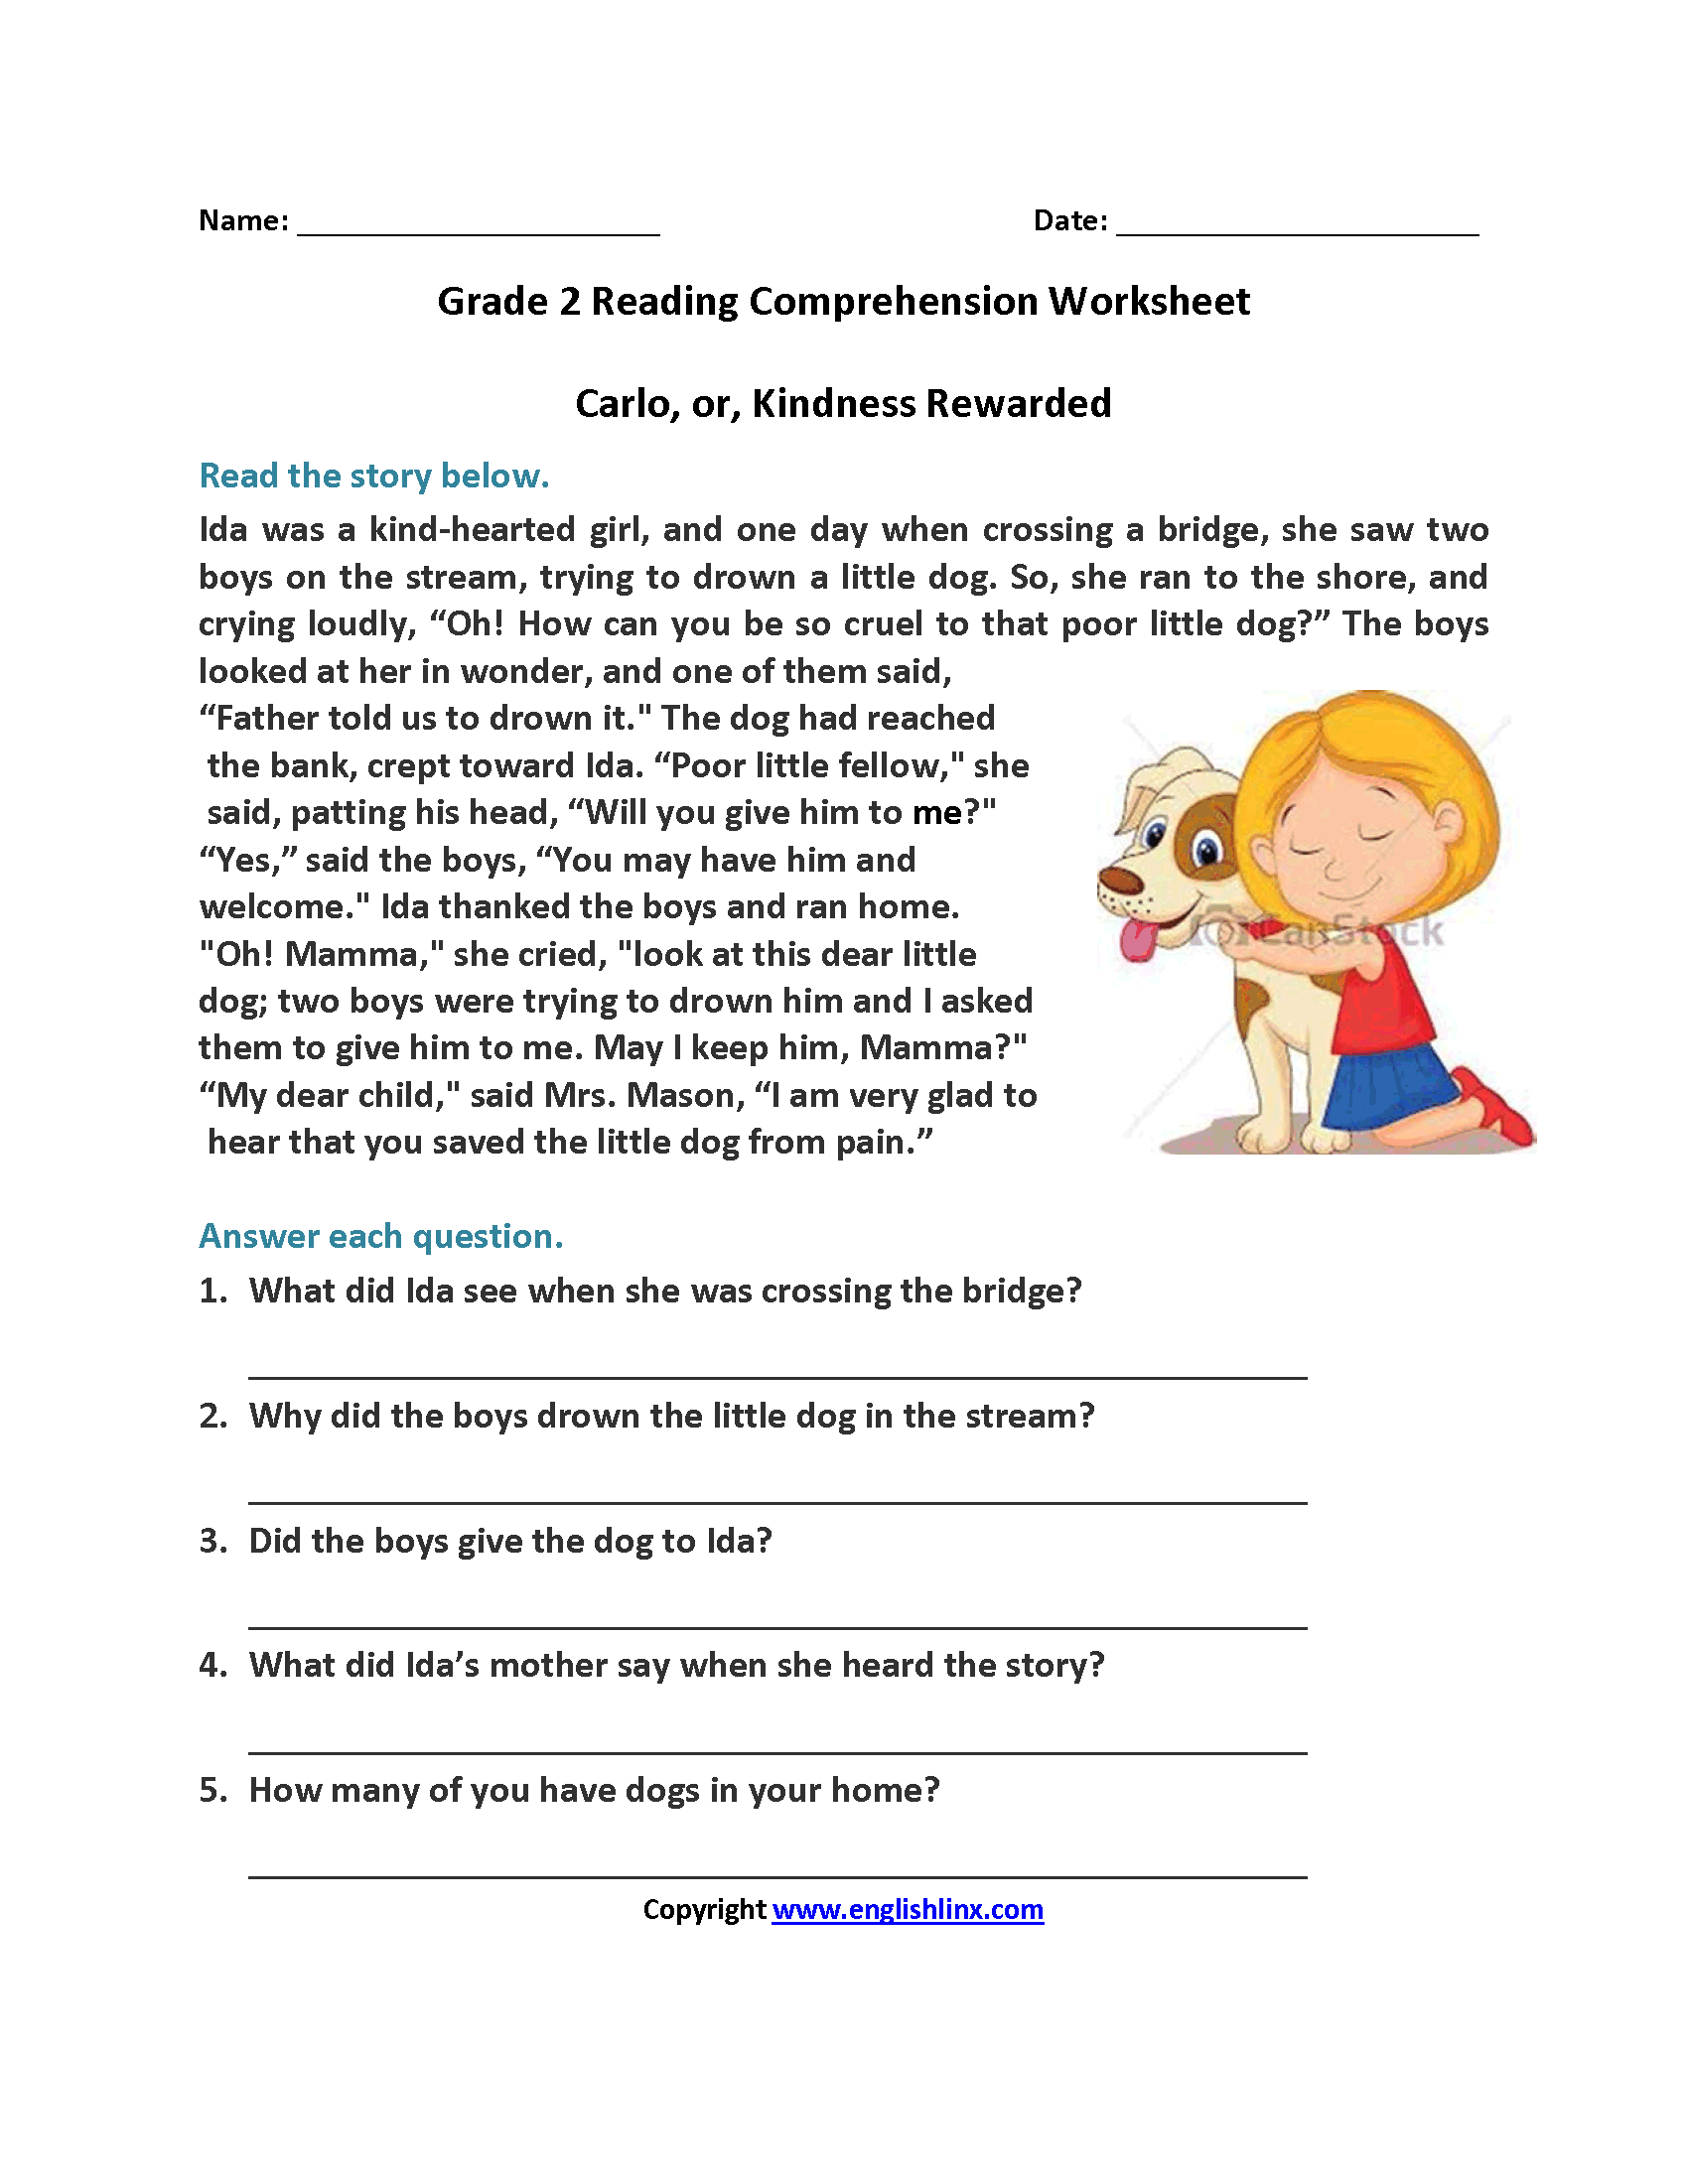 Carlo Or Kindness Rewarded Second Grade Reading Worksheets | Reading | Free Printable 3Rd Grade Reading Worksheets